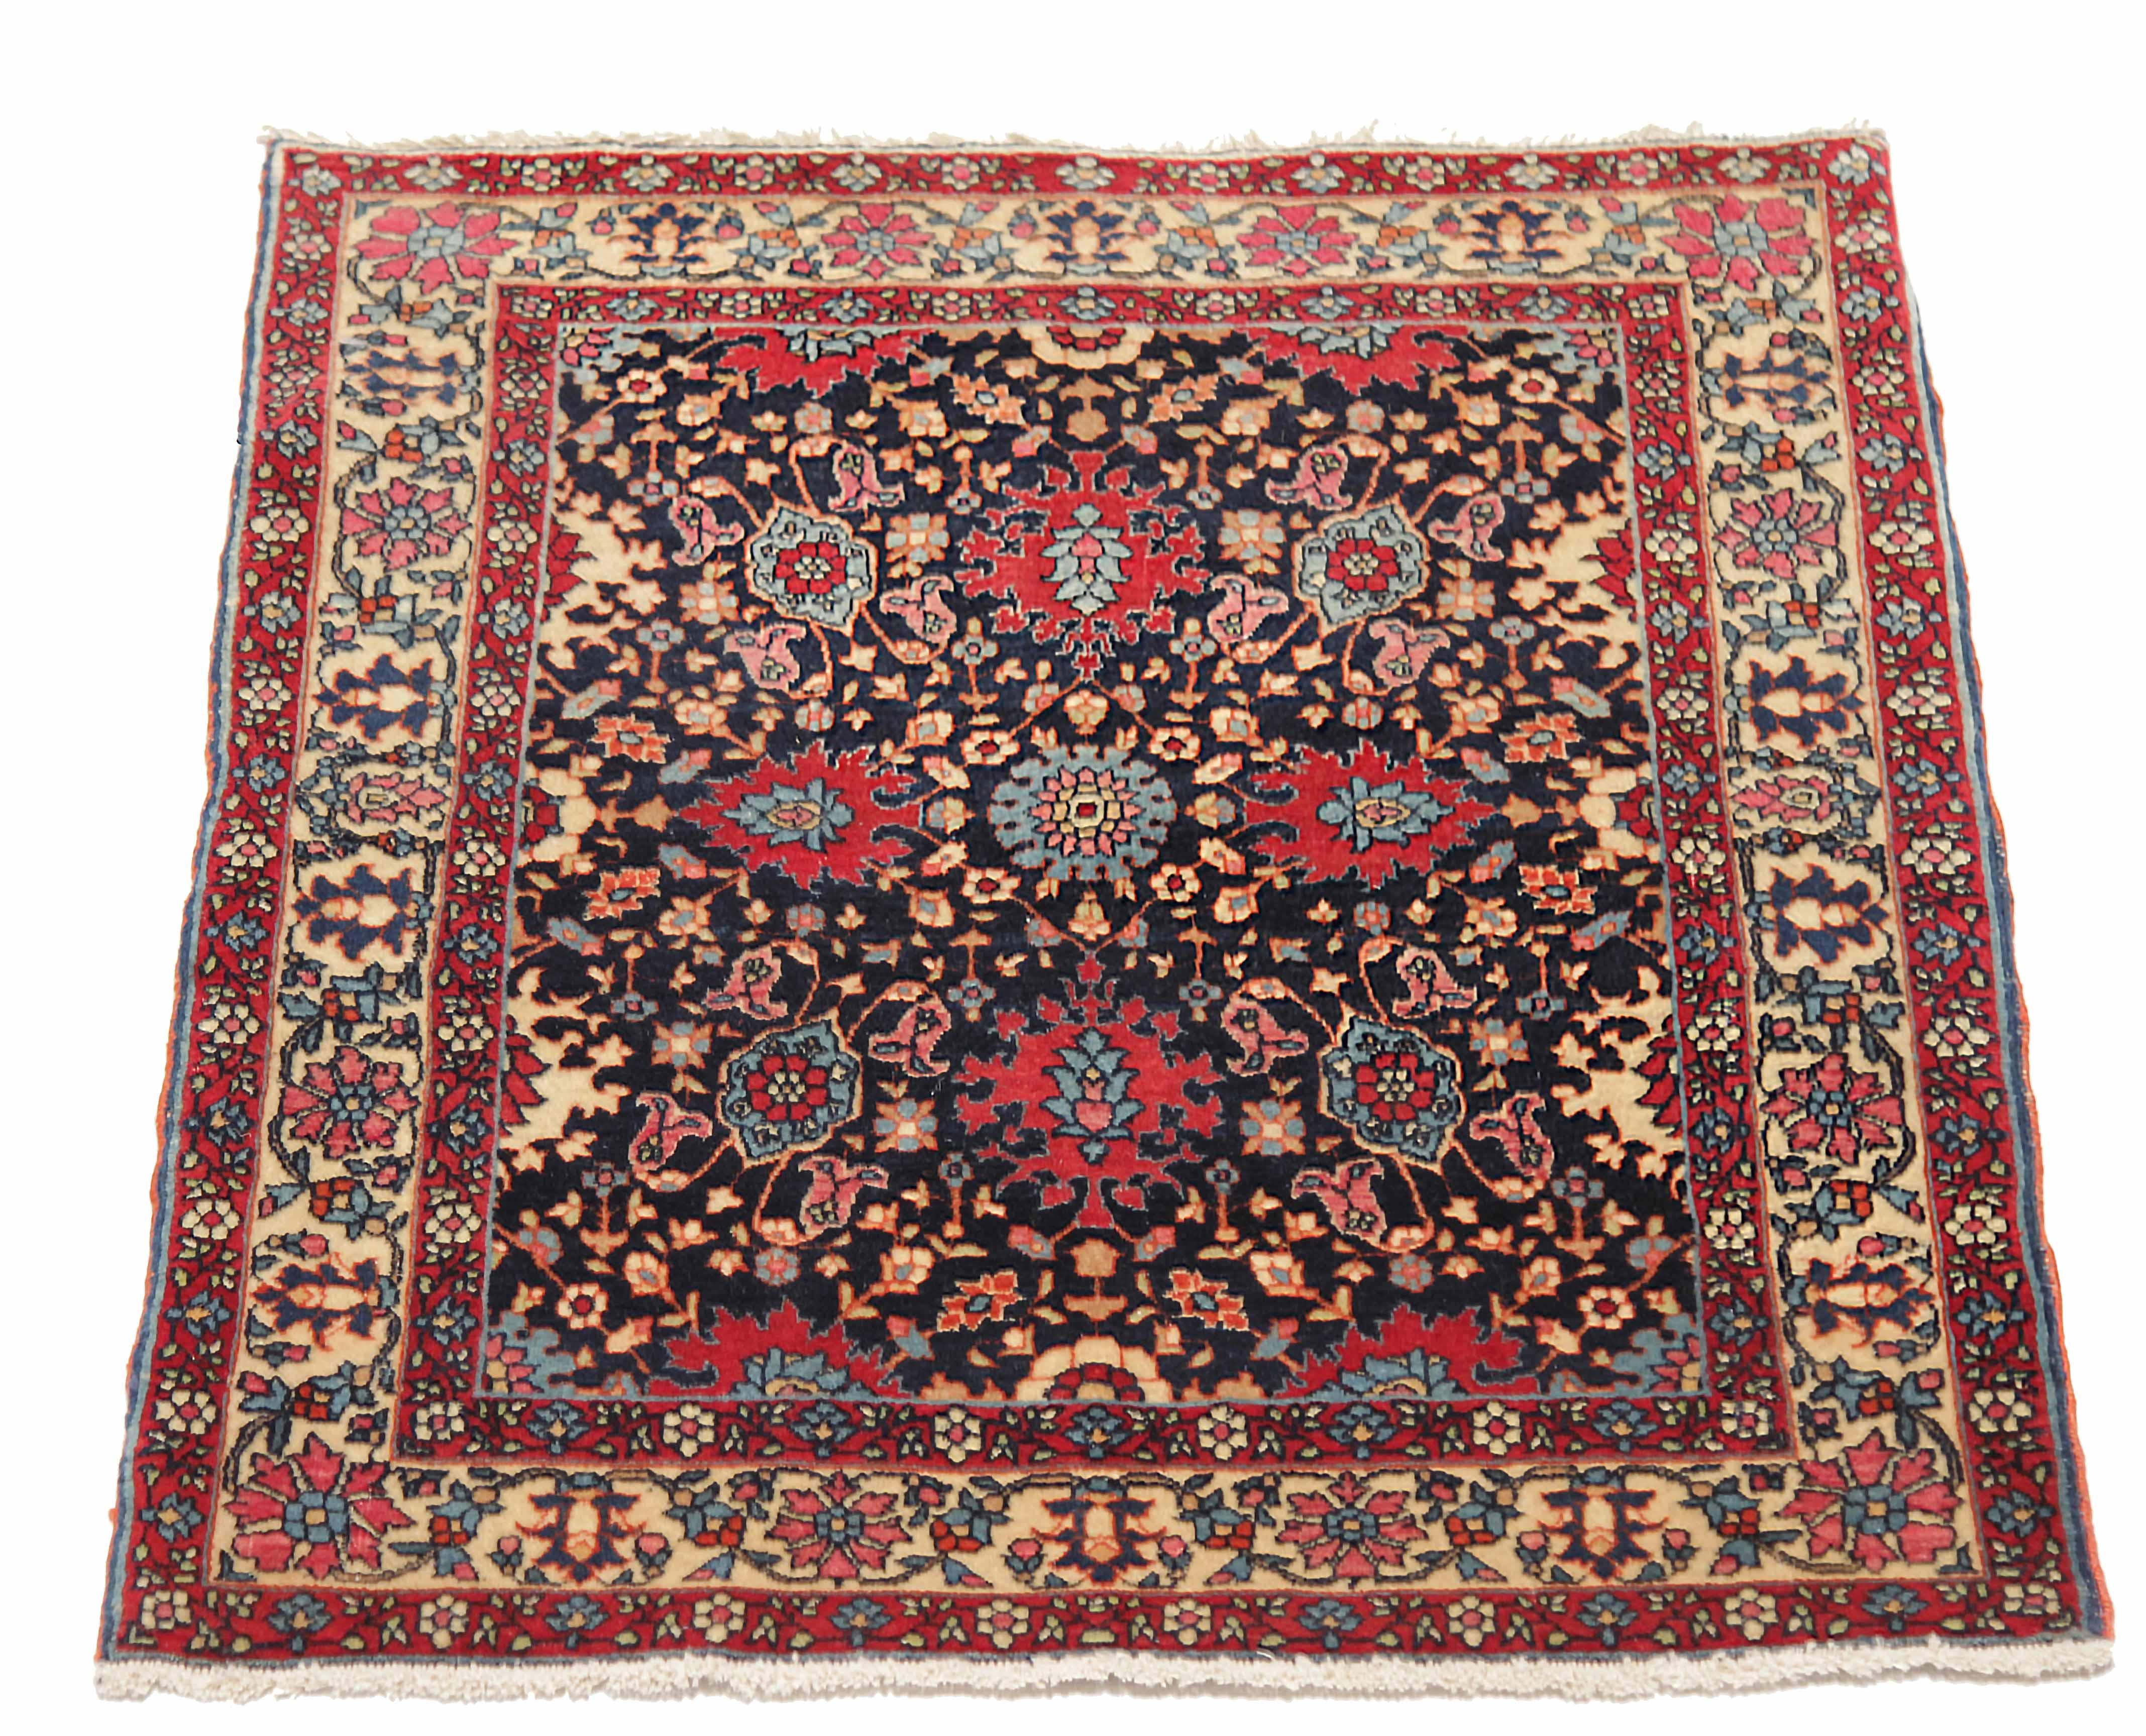 Antique Persian square rug handwoven from the finest sheep’s wool. It’s colored with all-natural vegetable dyes that are safe for humans and pets. It’s a traditional Tehran design handwoven by expert artisans. It’s a lovely square rug that can be